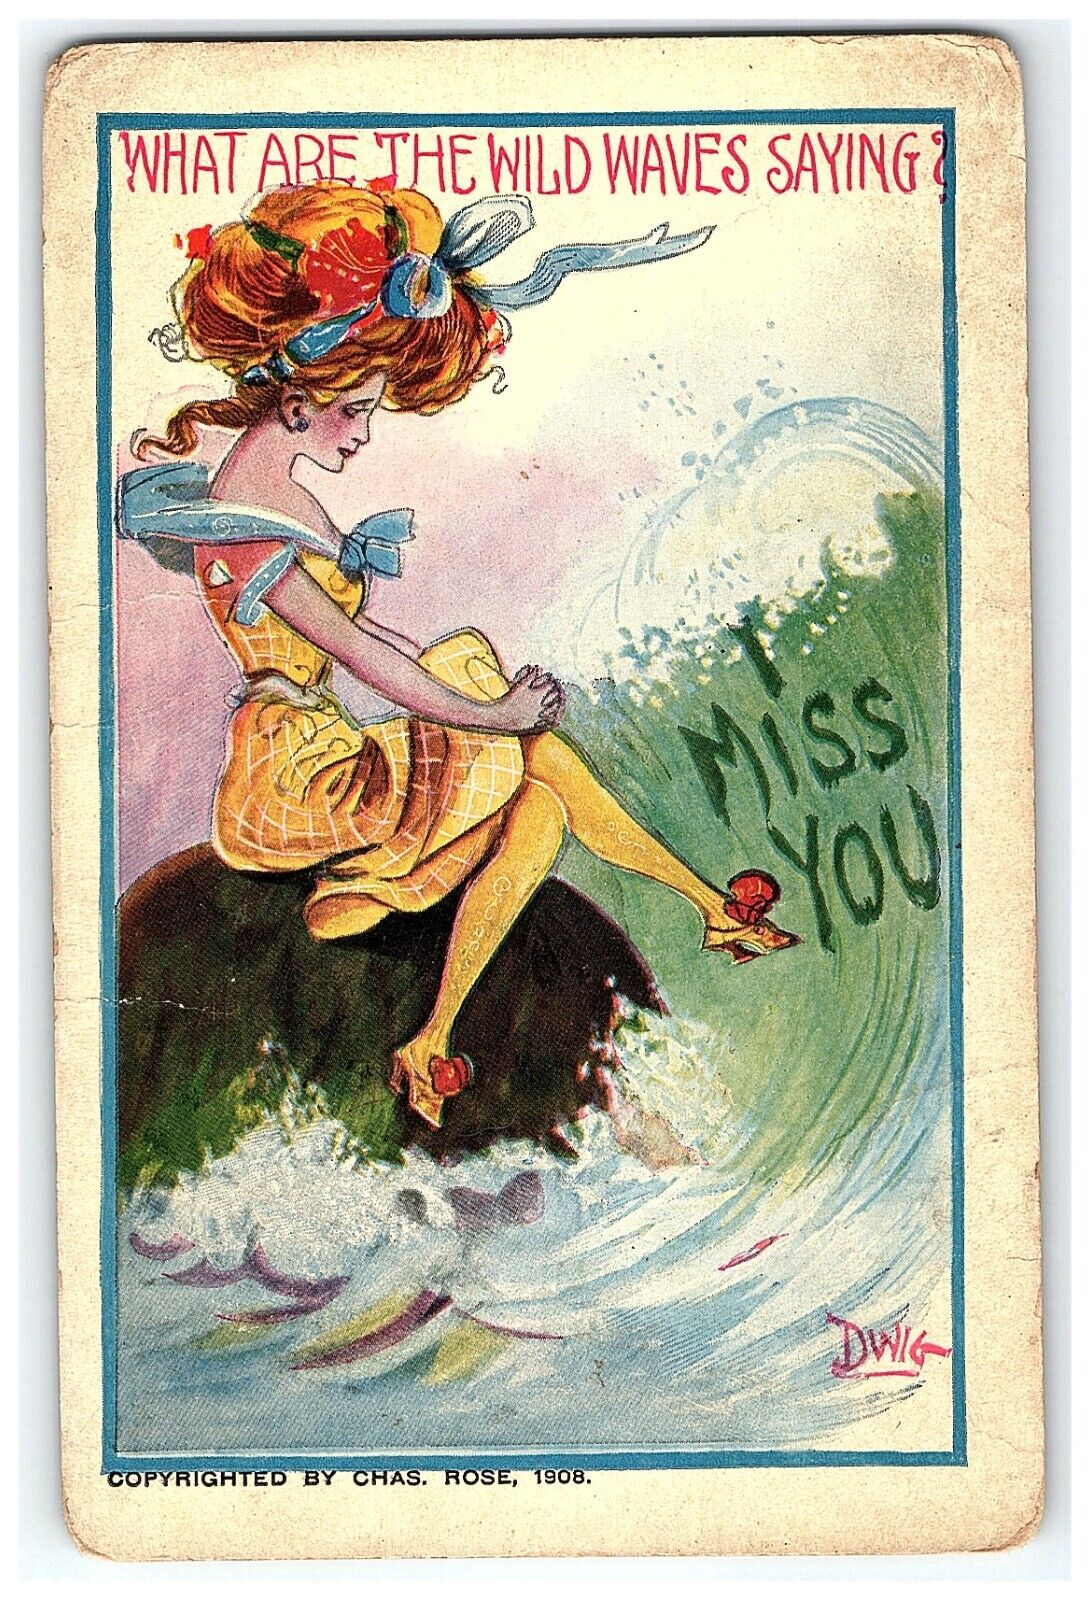 1908 Postcard What Are The Wild Waves Saying? I Miss You Dwig Artist Signed